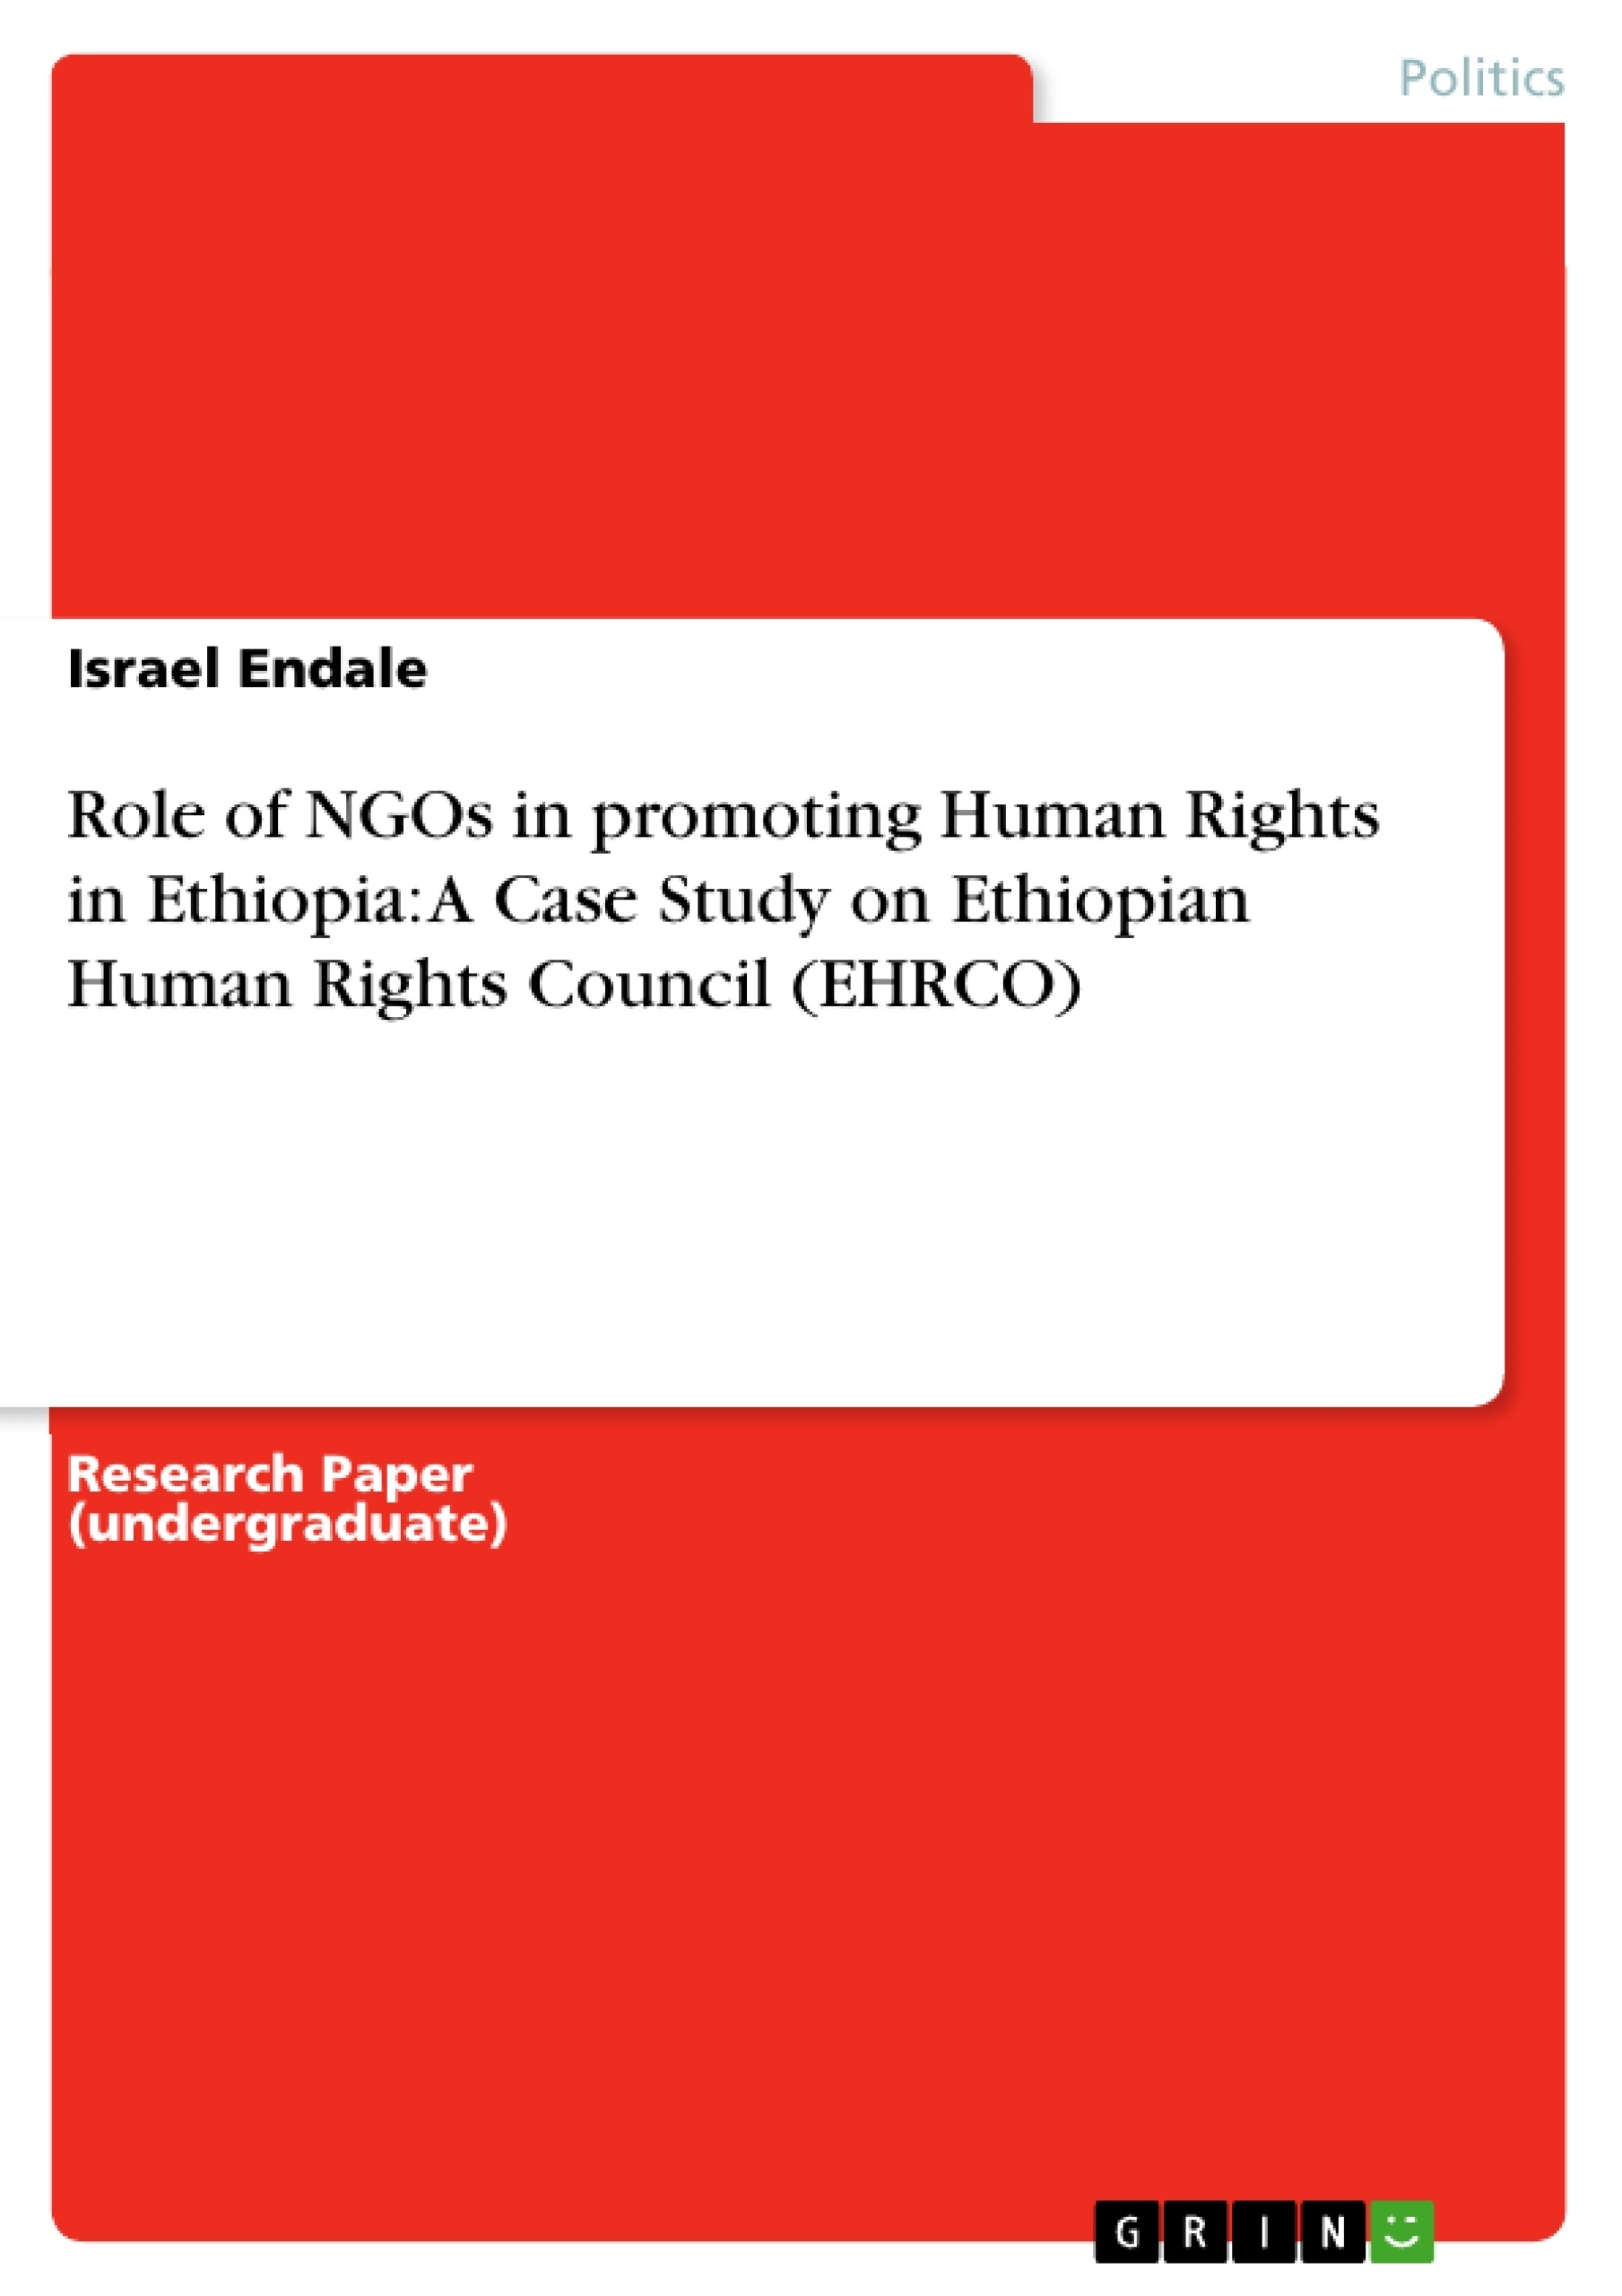 Titre: Role of NGOs in promoting Human Rights in Ethiopia: A Case Study on Ethiopian Human Rights Council (EHRCO)